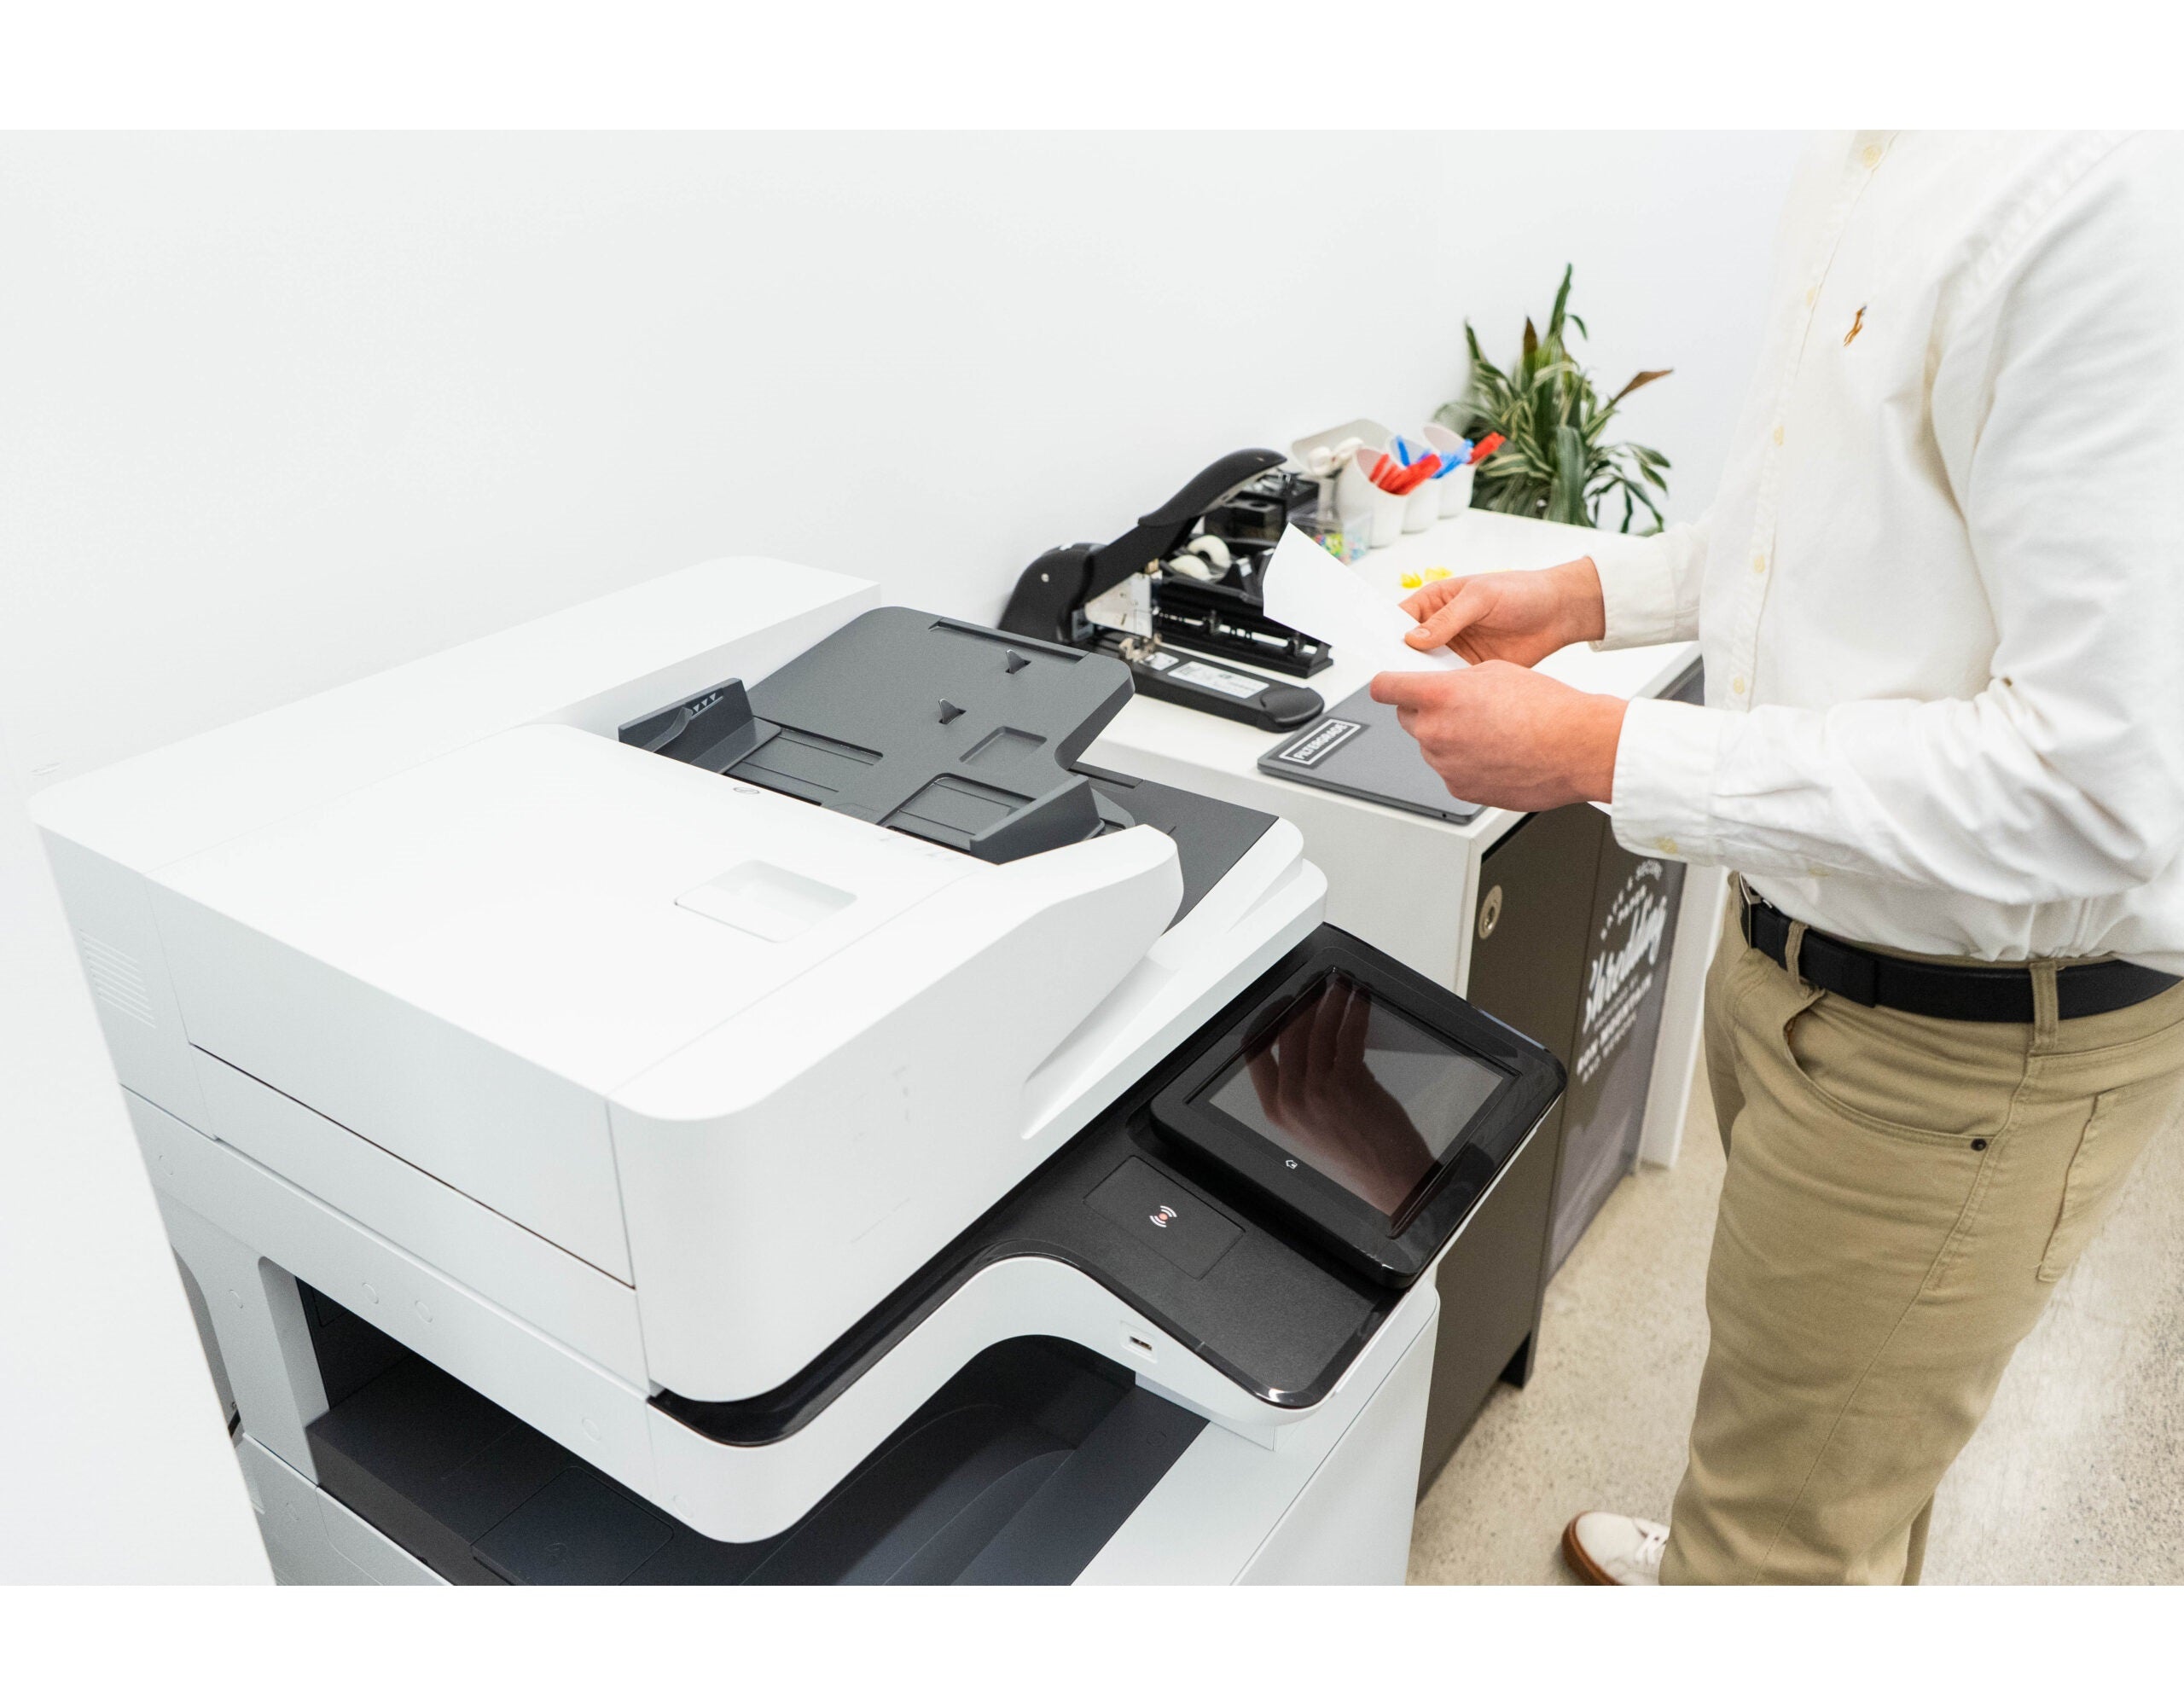 10 Things to Know About Business Copiers Versus Home/Personal Copiers